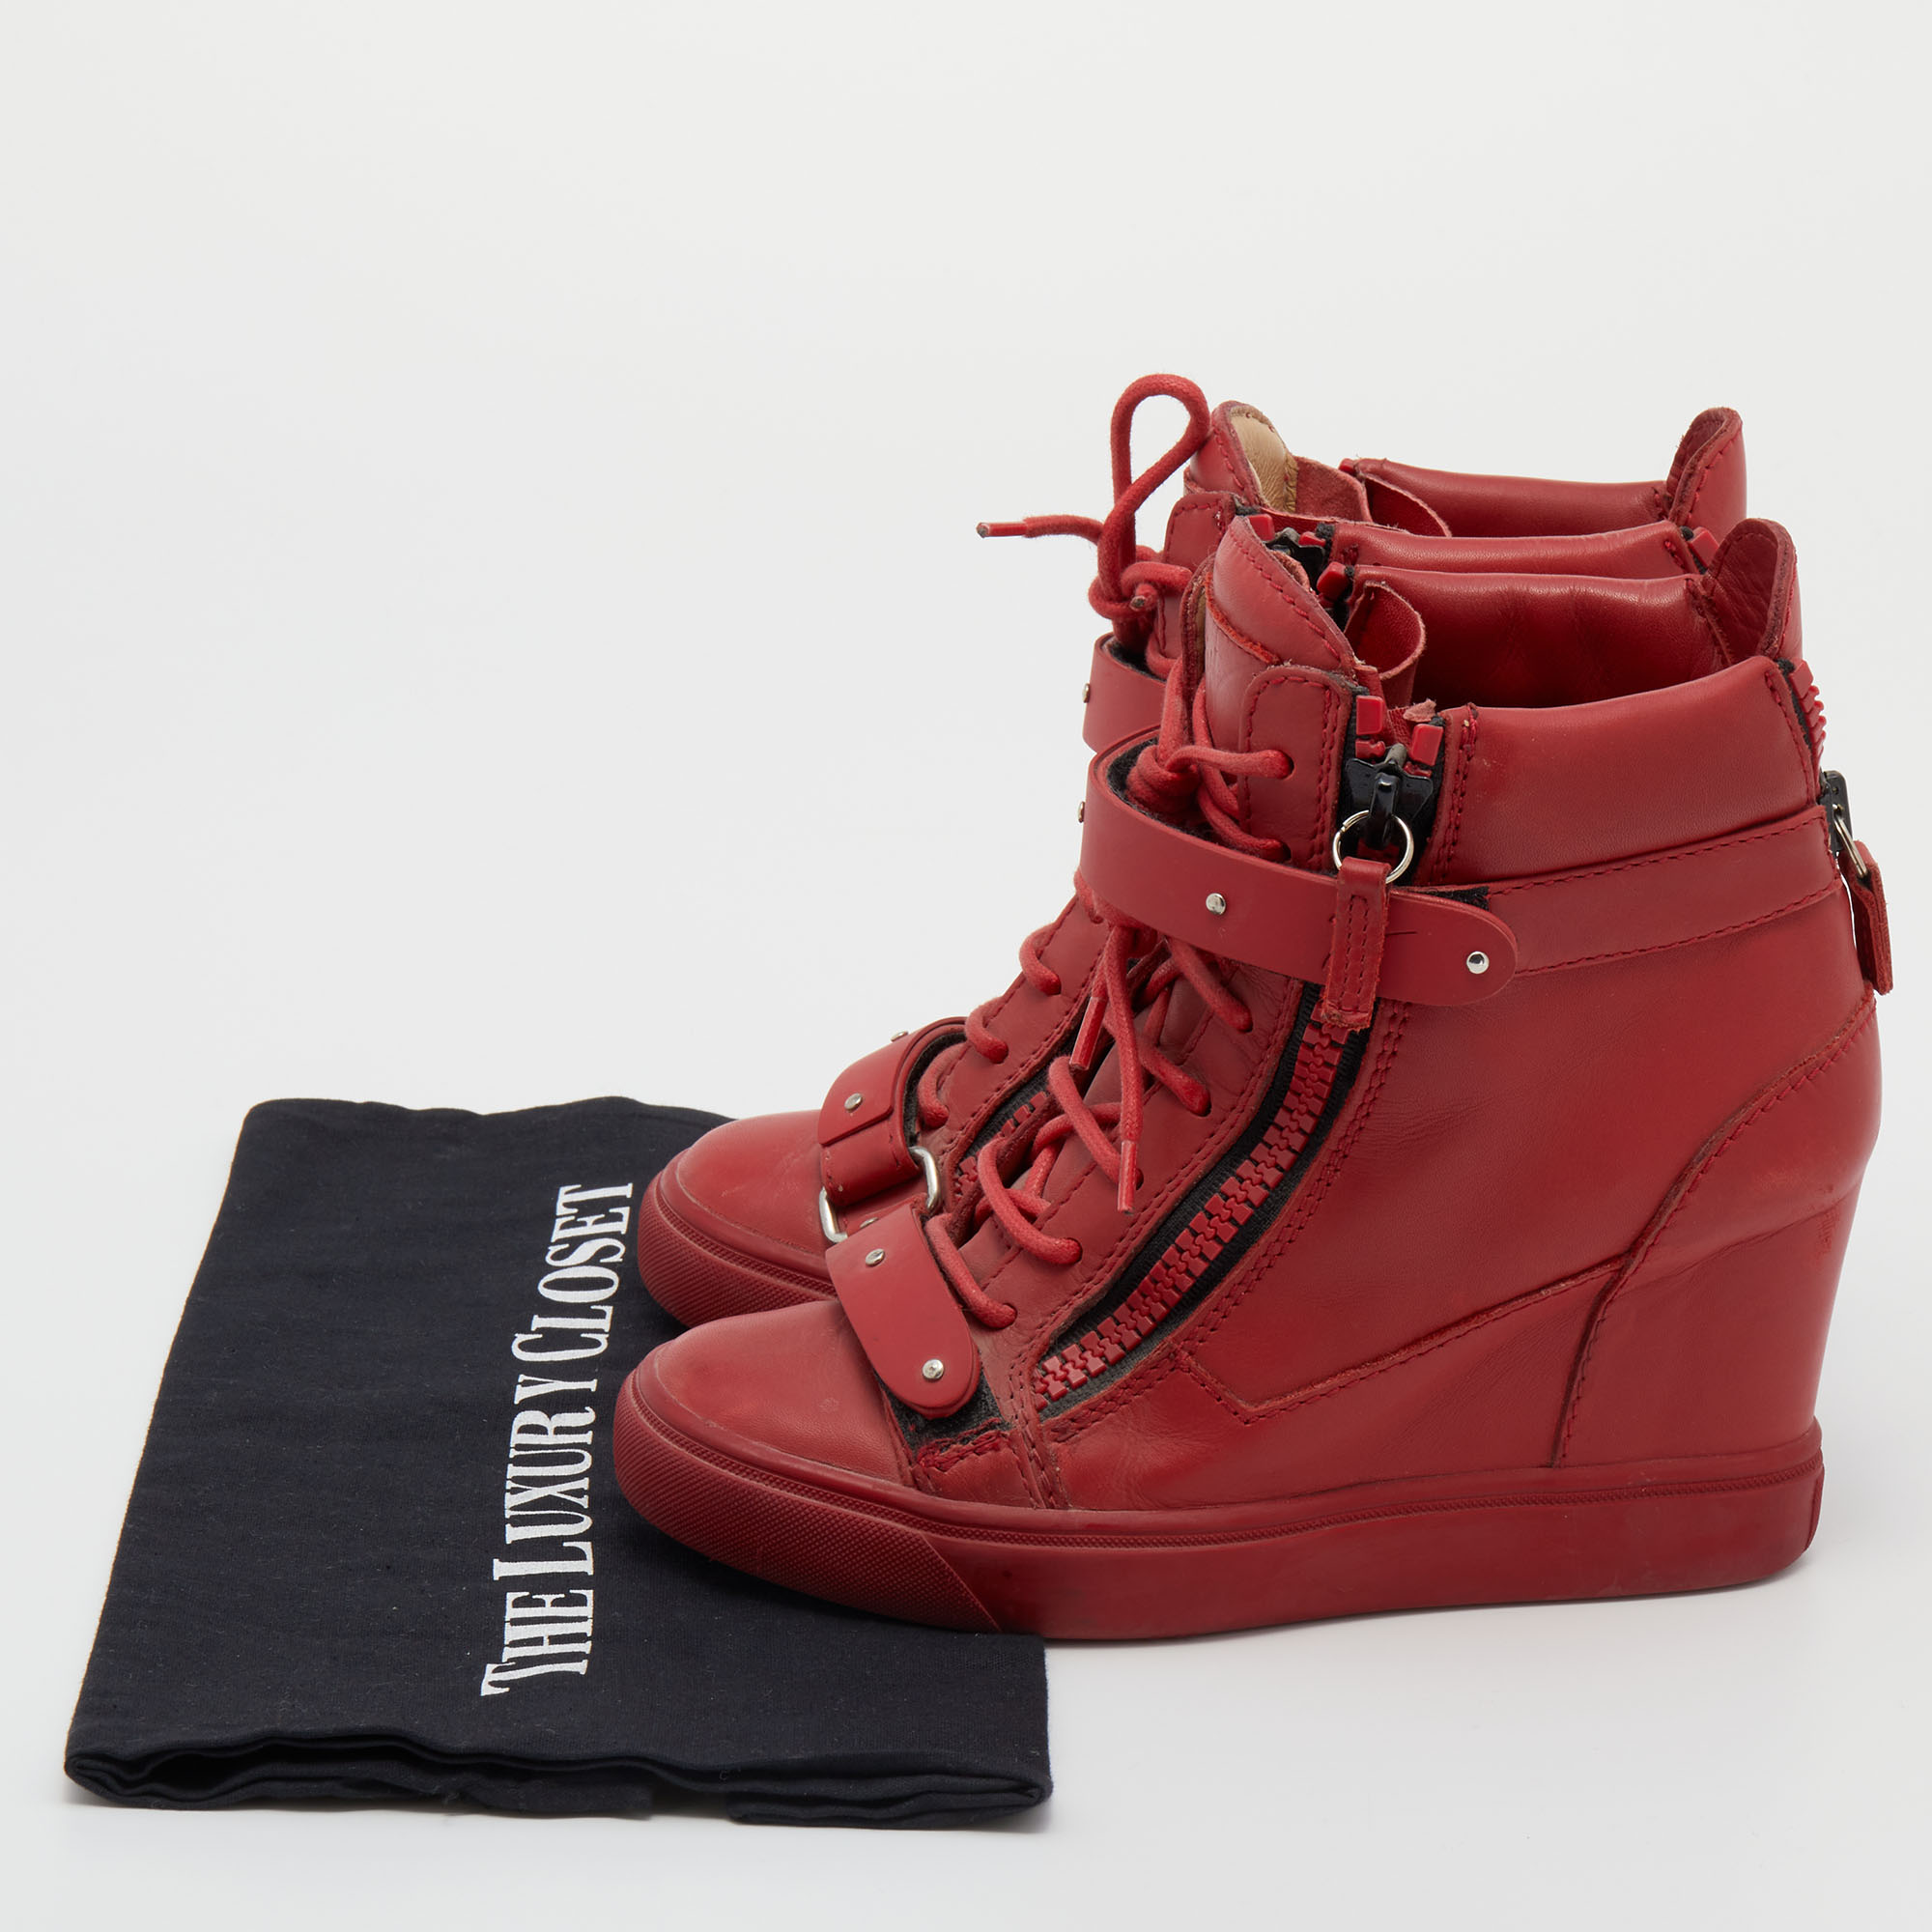 Giuseppe Zanotti Red Leather High Top Wedge Sneakers Size 36.5